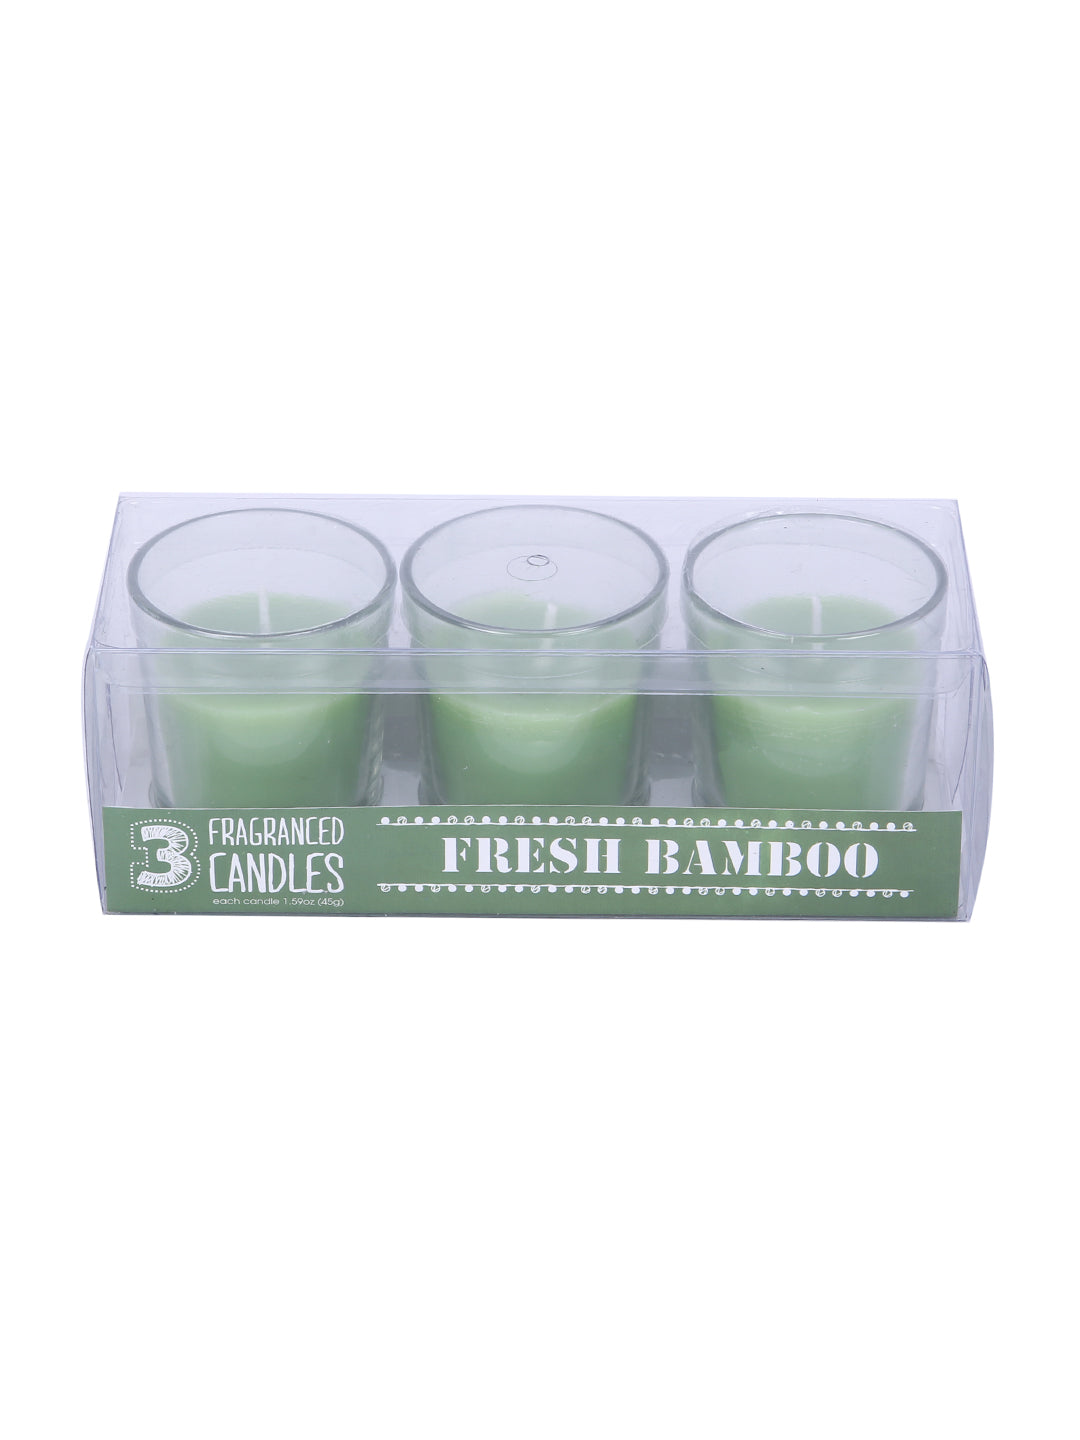 Set of 3 Hosley® Highly Fragranced Fresh Bamboo Filled Glass Candles, 1.6 Oz wax each